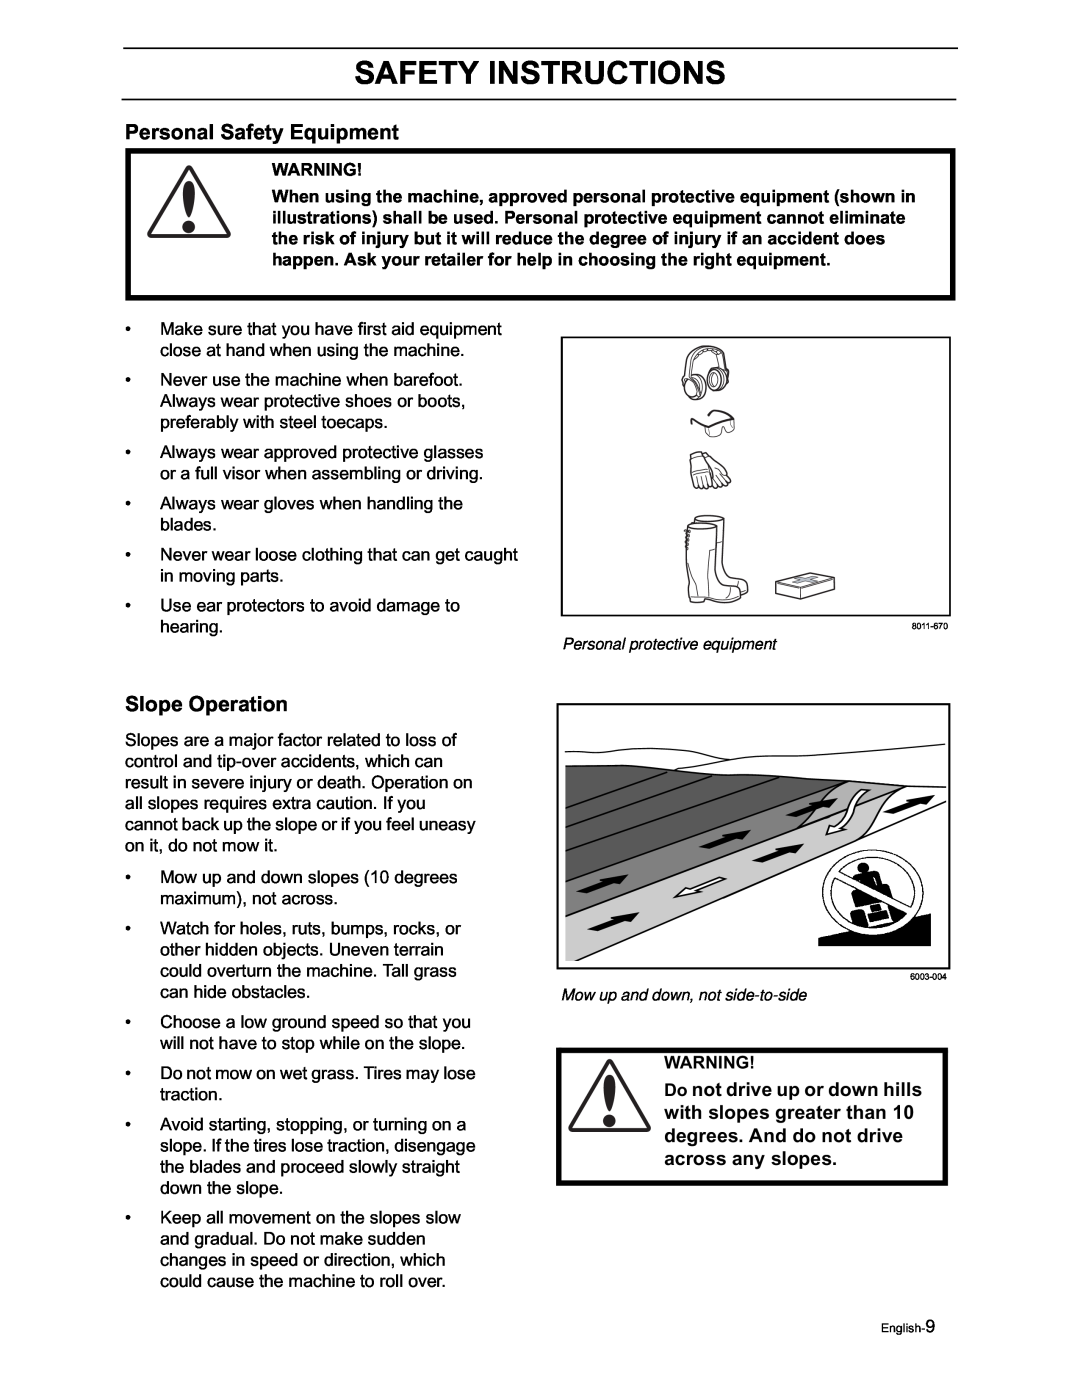 Yazoo/Kees ZVKH61273, ZVKW52253, ZVKH61303, ZVKH72303 manual Personal Safety Equipment, Slope Operation, Safety Instructions 